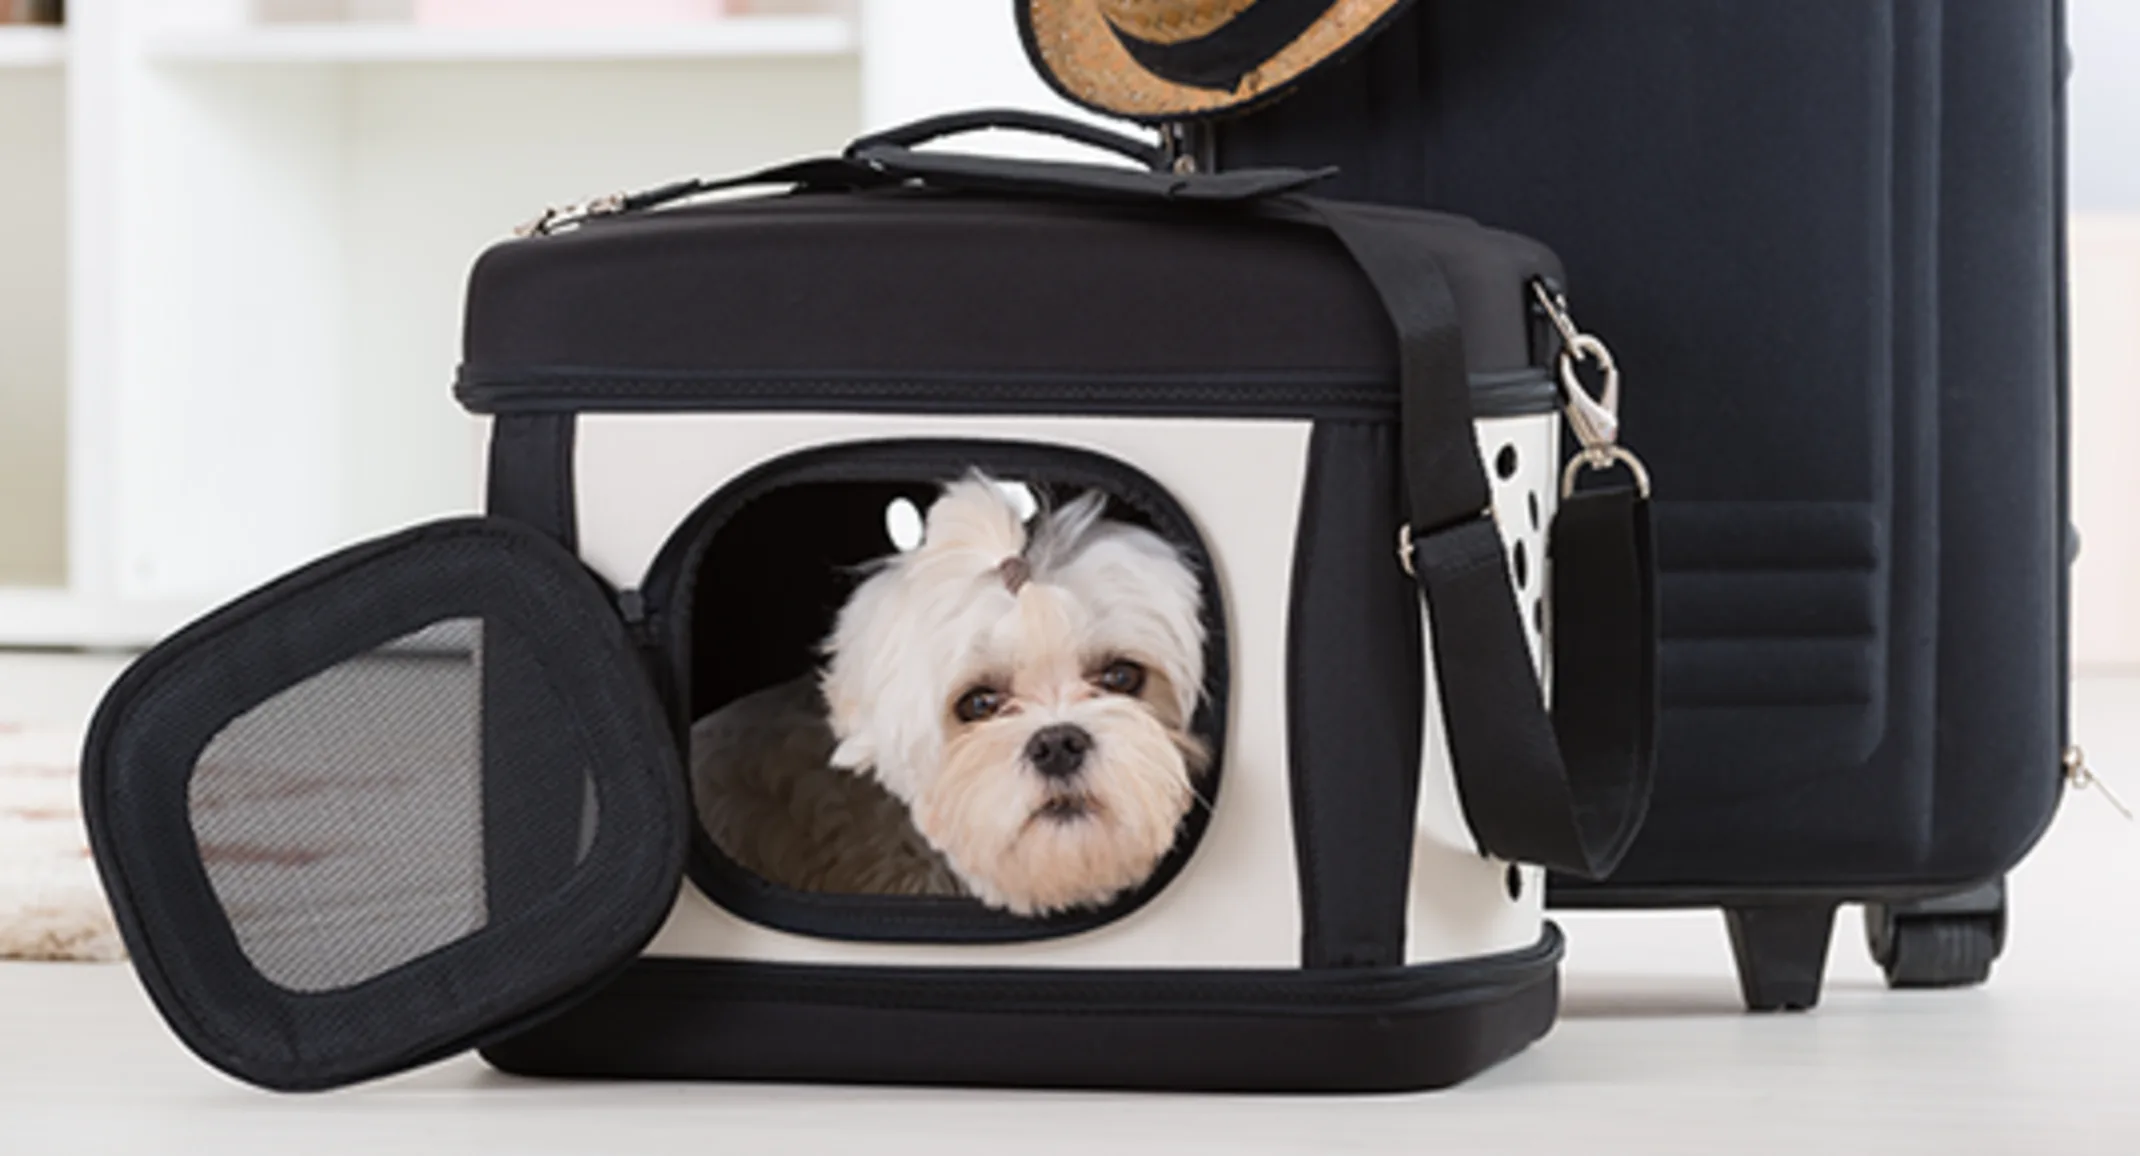 DOG IN AIRPLANE CRATE SUITCASE